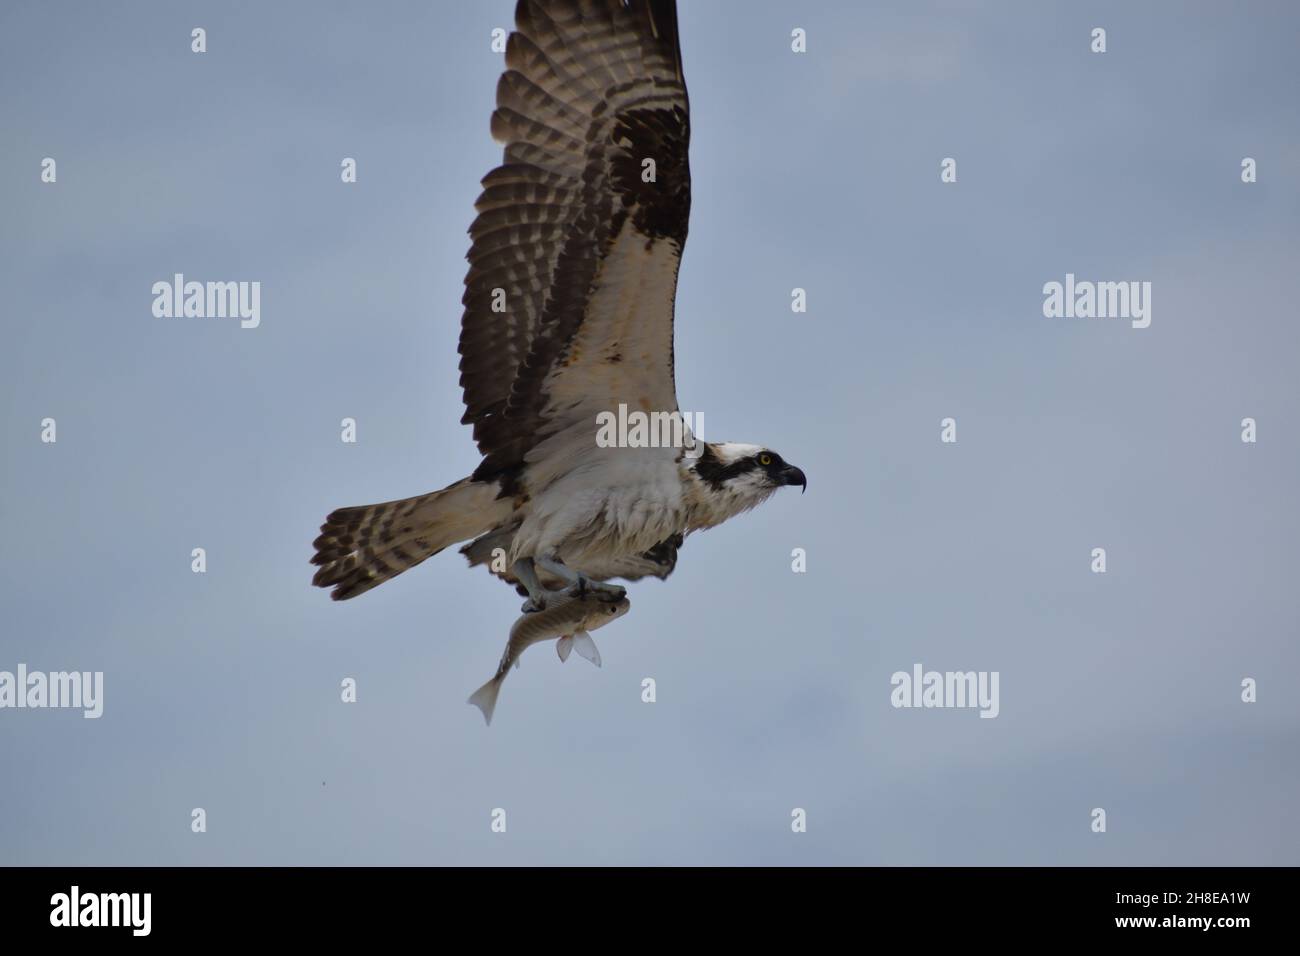 Close-up of an Osprey flying with a fish in its claws. Stock Photo